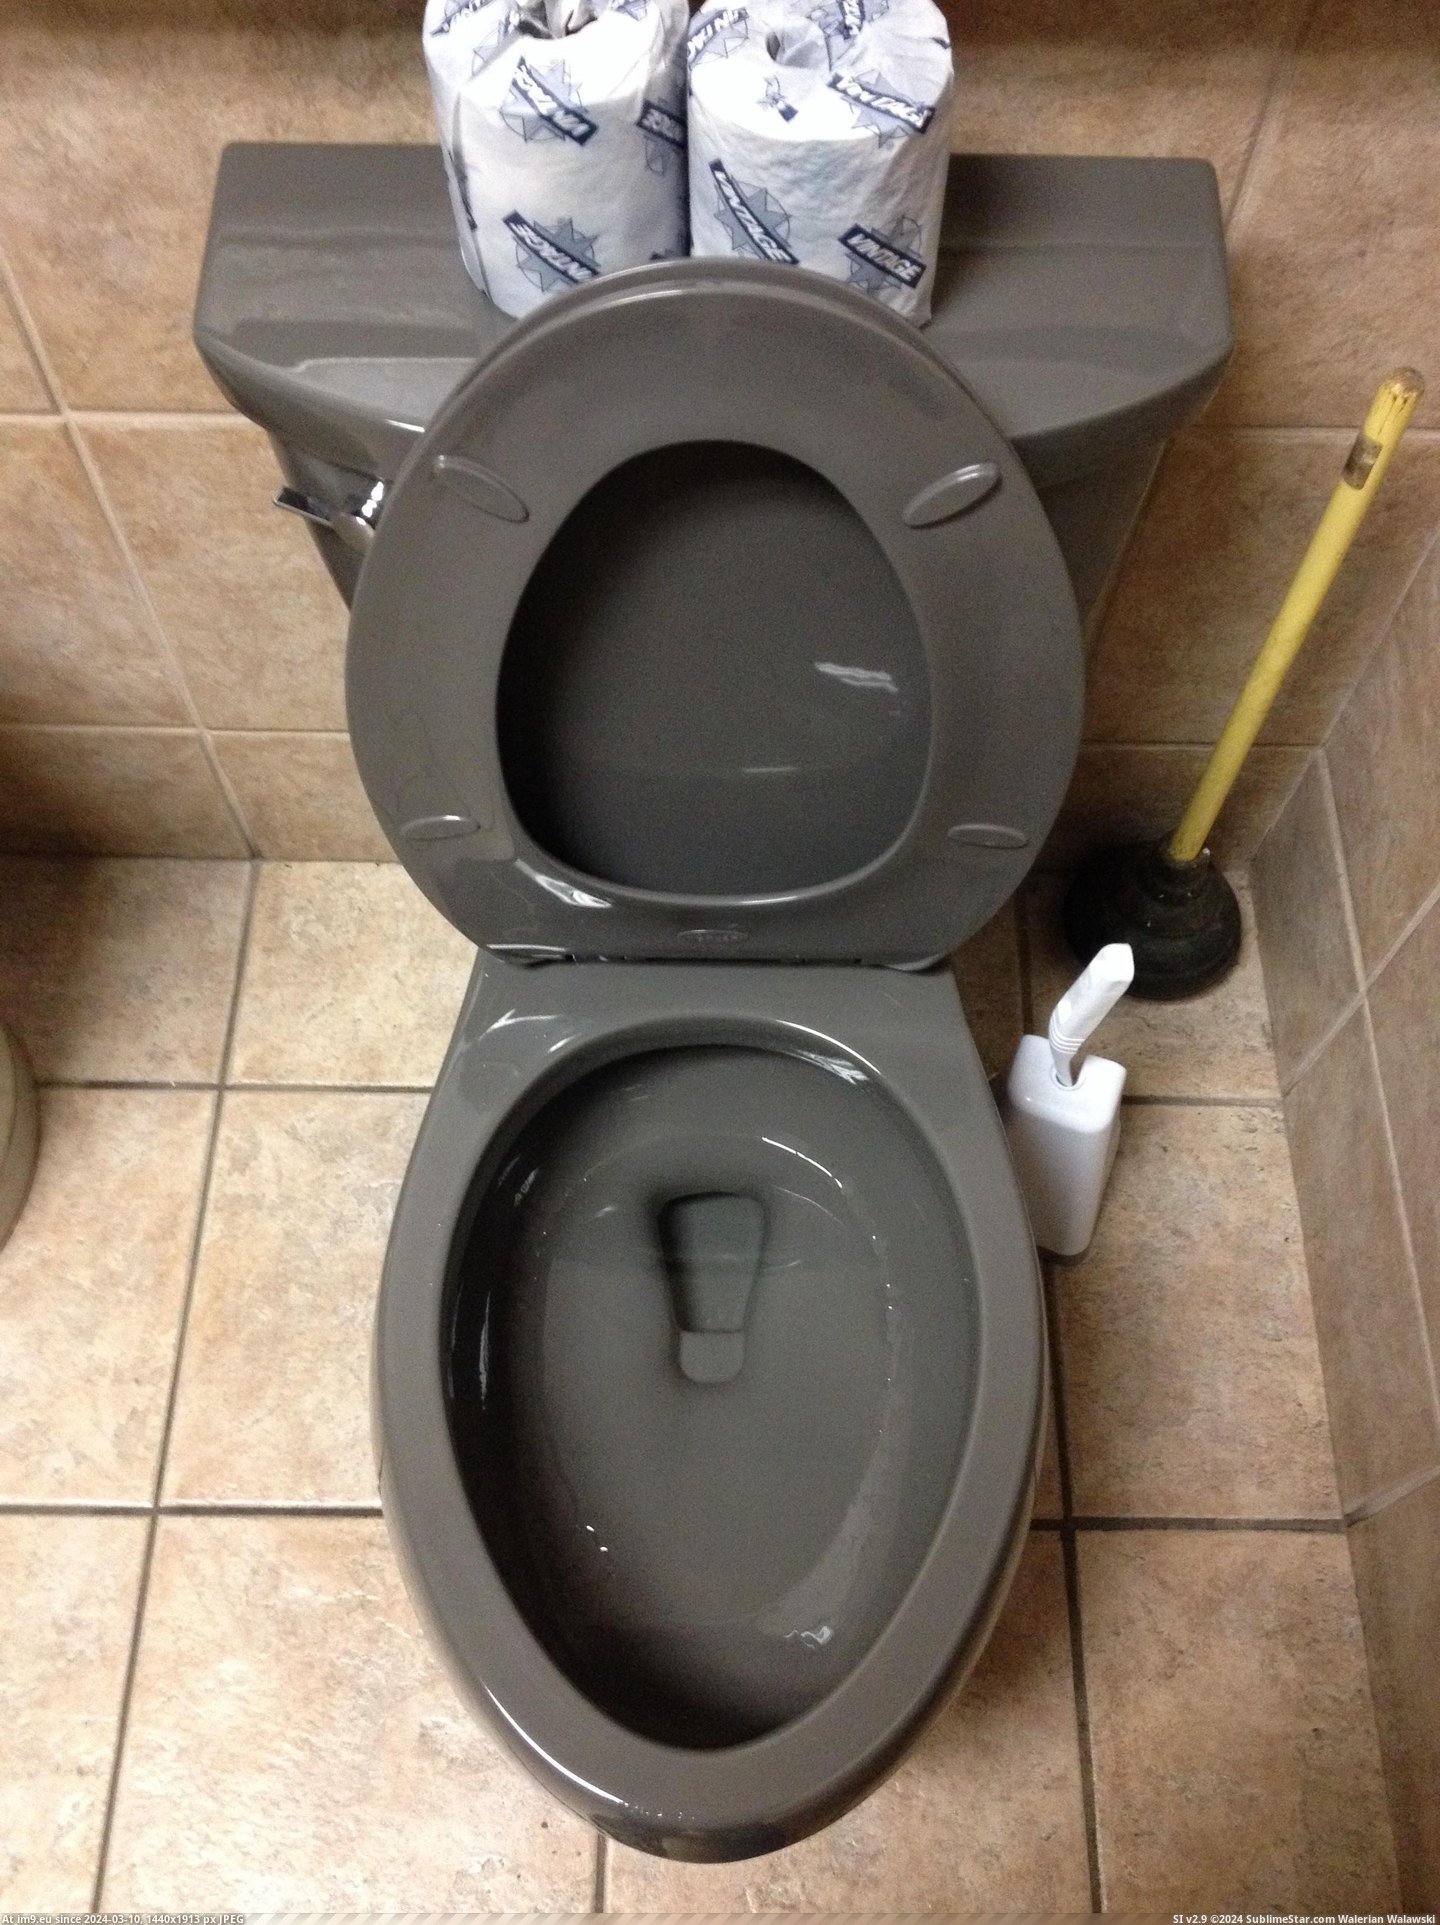 #Black #White #Toilet #Gray #Urinal #All #Bathroom [Mildlyinteresting] The toilet and urinal in the bathroom were all gray rather than just white or white and black 2 Pic. (Image of album My r/MILDLYINTERESTING favs))